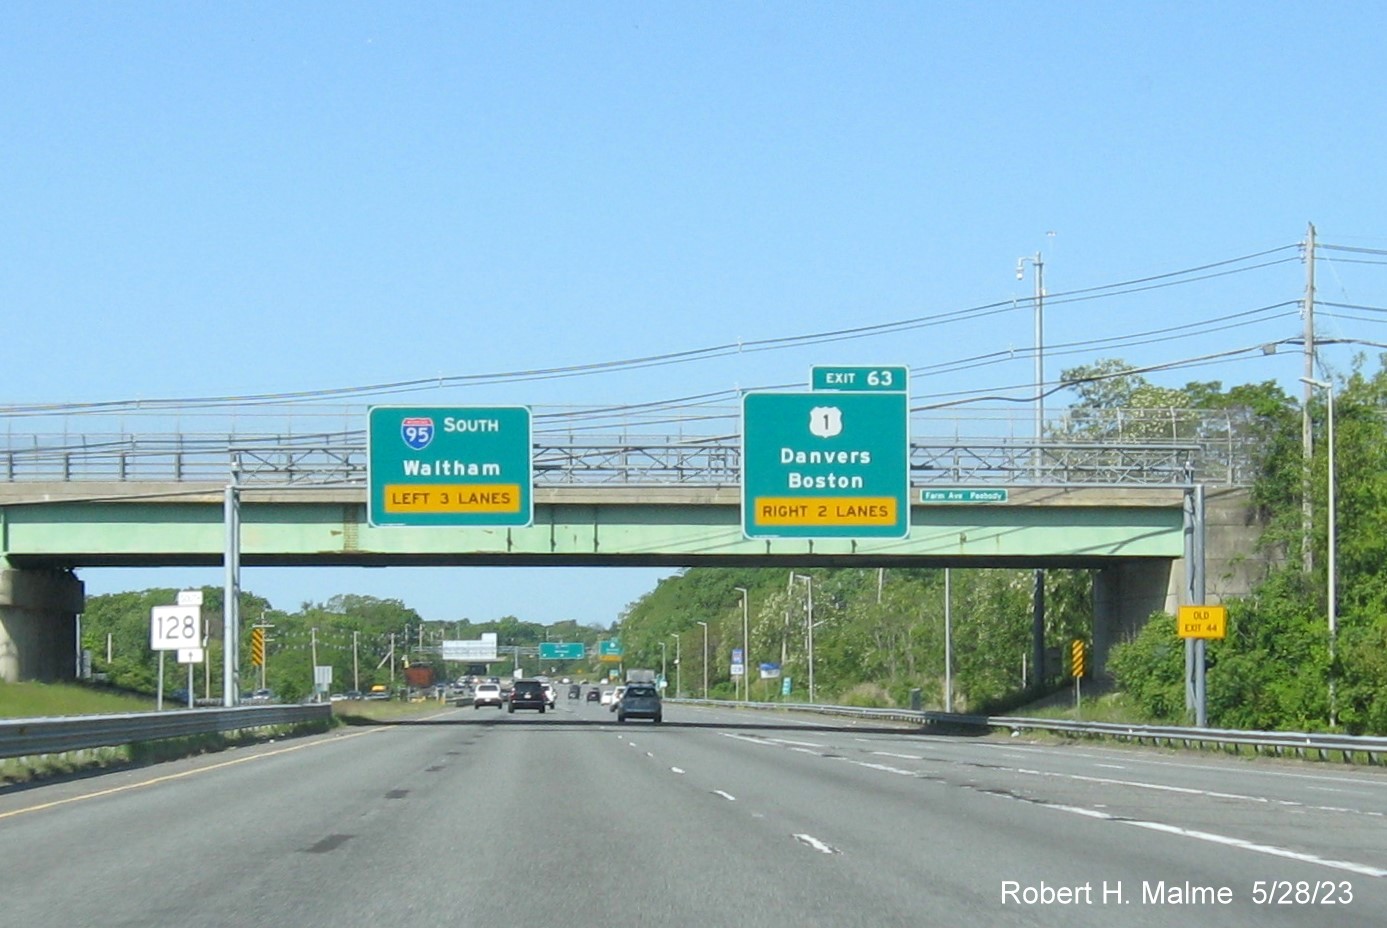 Image of recenty placed? 1/2 mile advance sign for the US 1 exit on I-95/MA 128 South in Peabody, May 2023